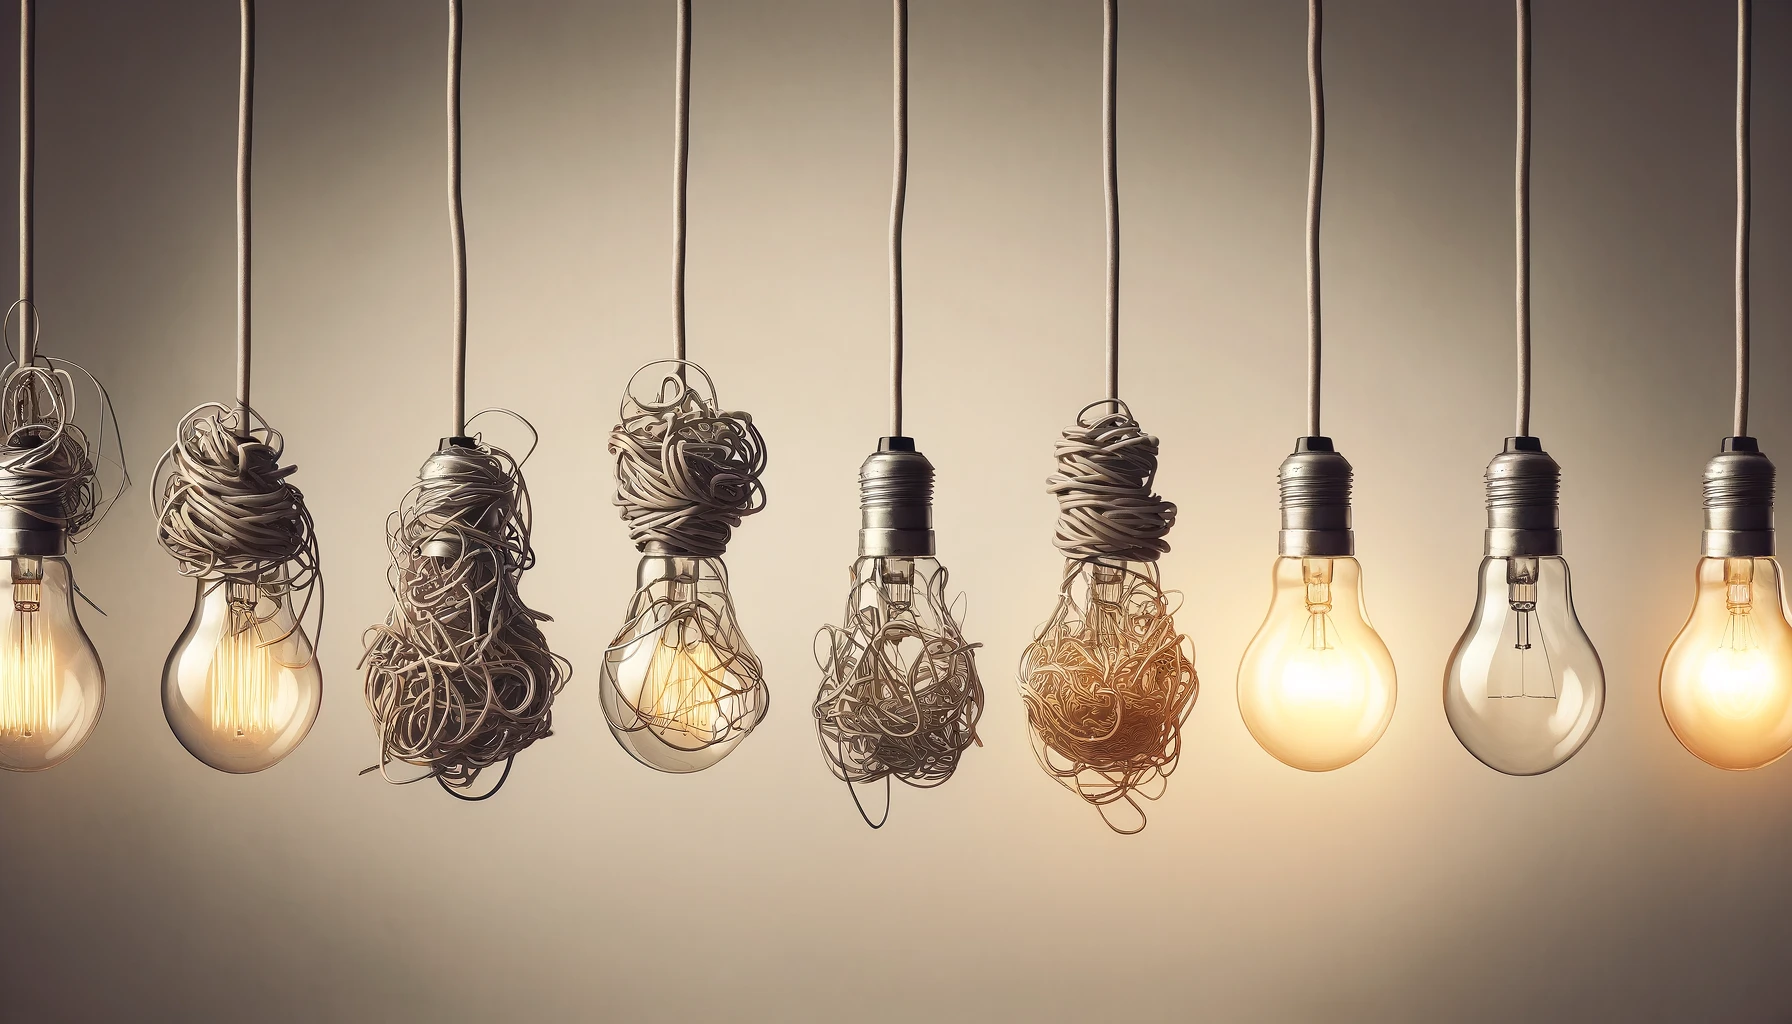 Four lightbulbs in a row with cords transitioning from tangled to untangled, symbolizing the simplification of a brand message.